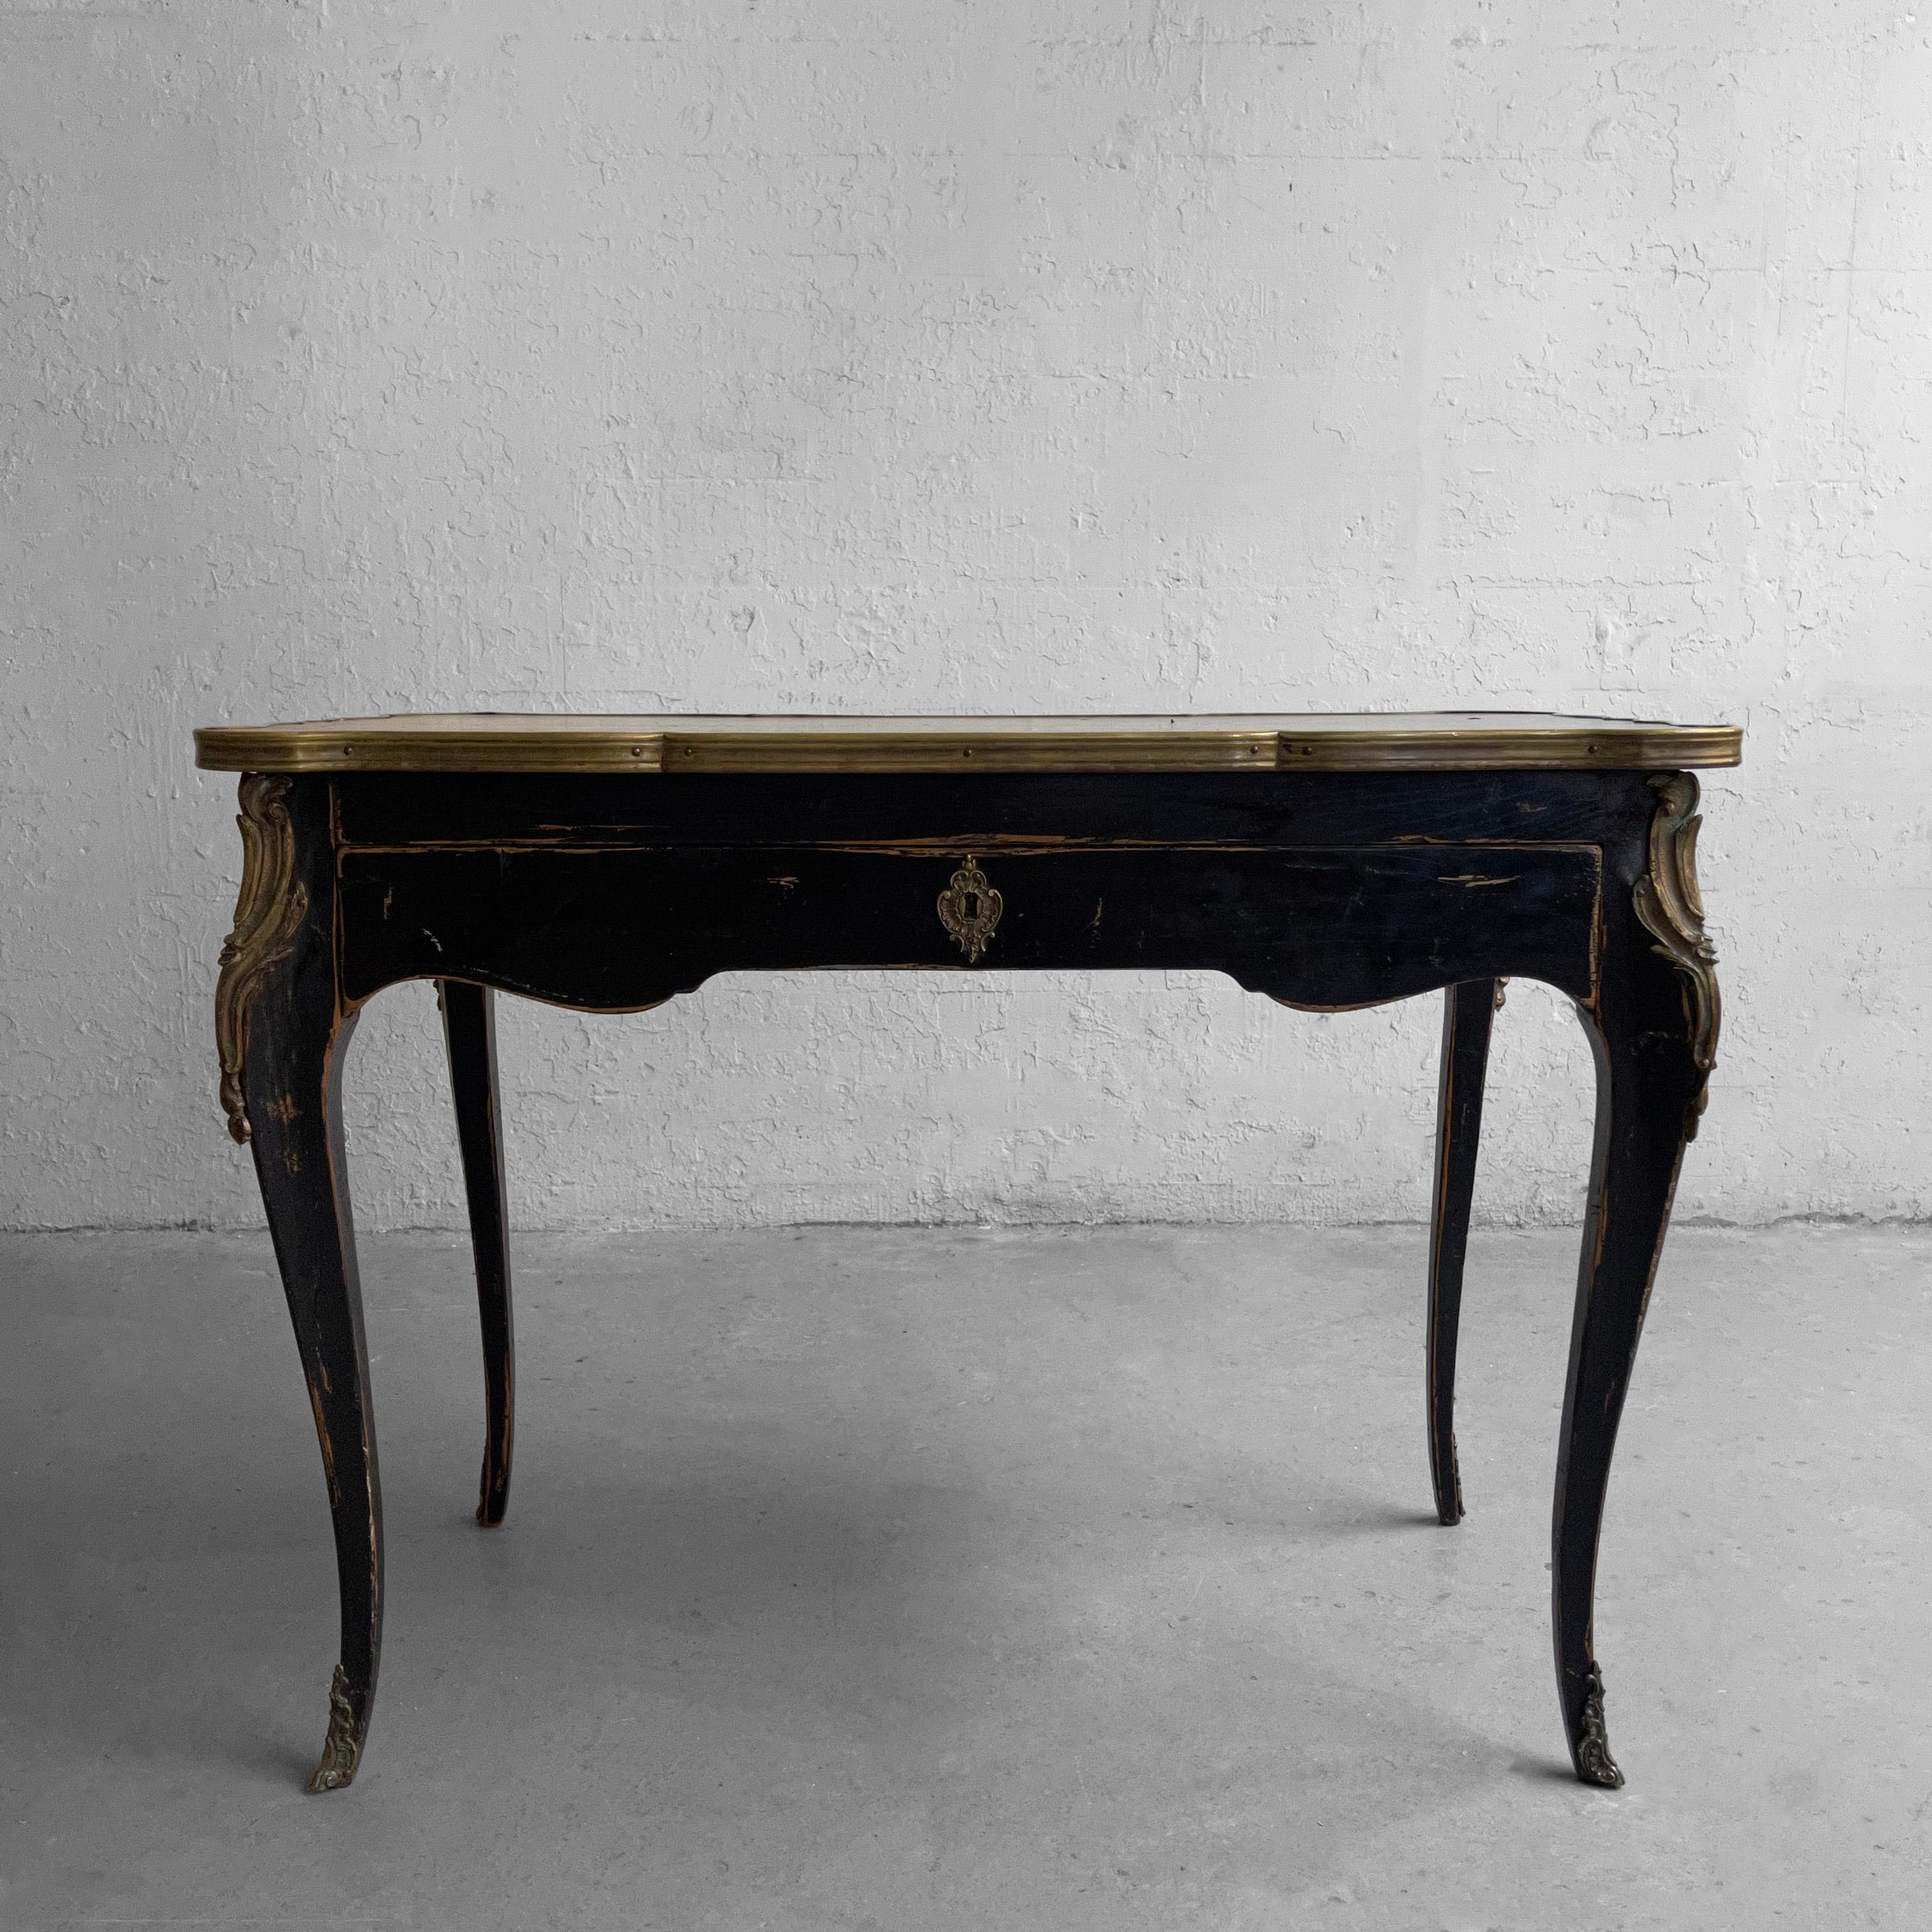 French, Louis XV style, black lacquered chestnut writing desk, circa 1940's features a brass trimmed, embossed leather top with one center drawer and cabriole legs with carved bronze trim detail. The chair clearance is 22.5 inches wide x 23.5 inches